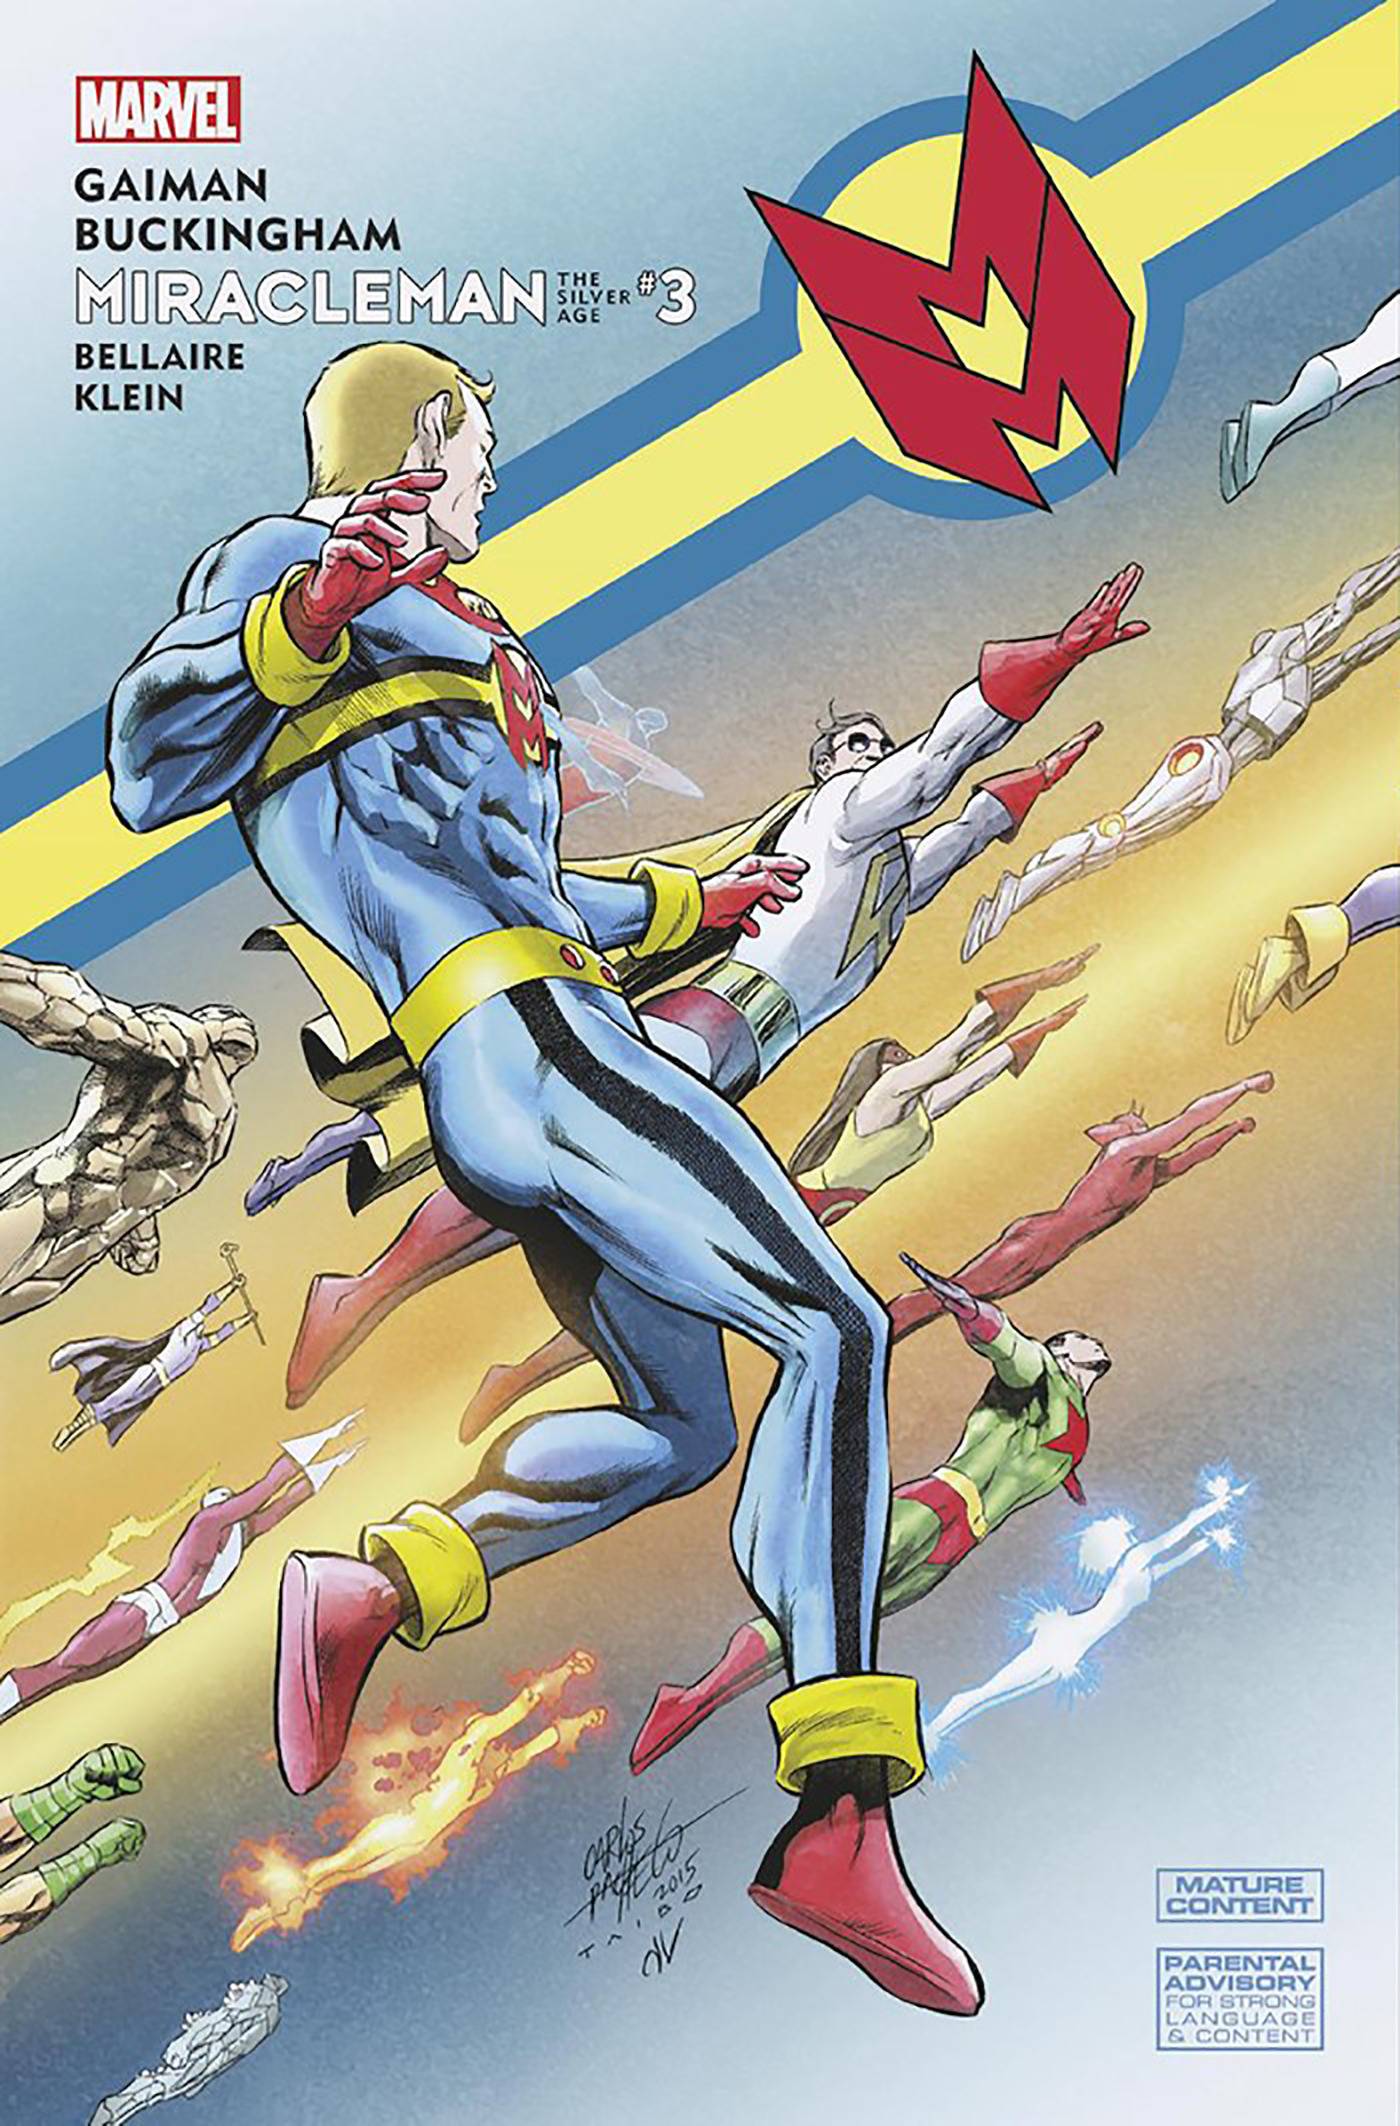 Miracleman Silver Age #3 (2022) Carlos Pacheco 1:25 Release 12/28/2022 | BD Cosmos